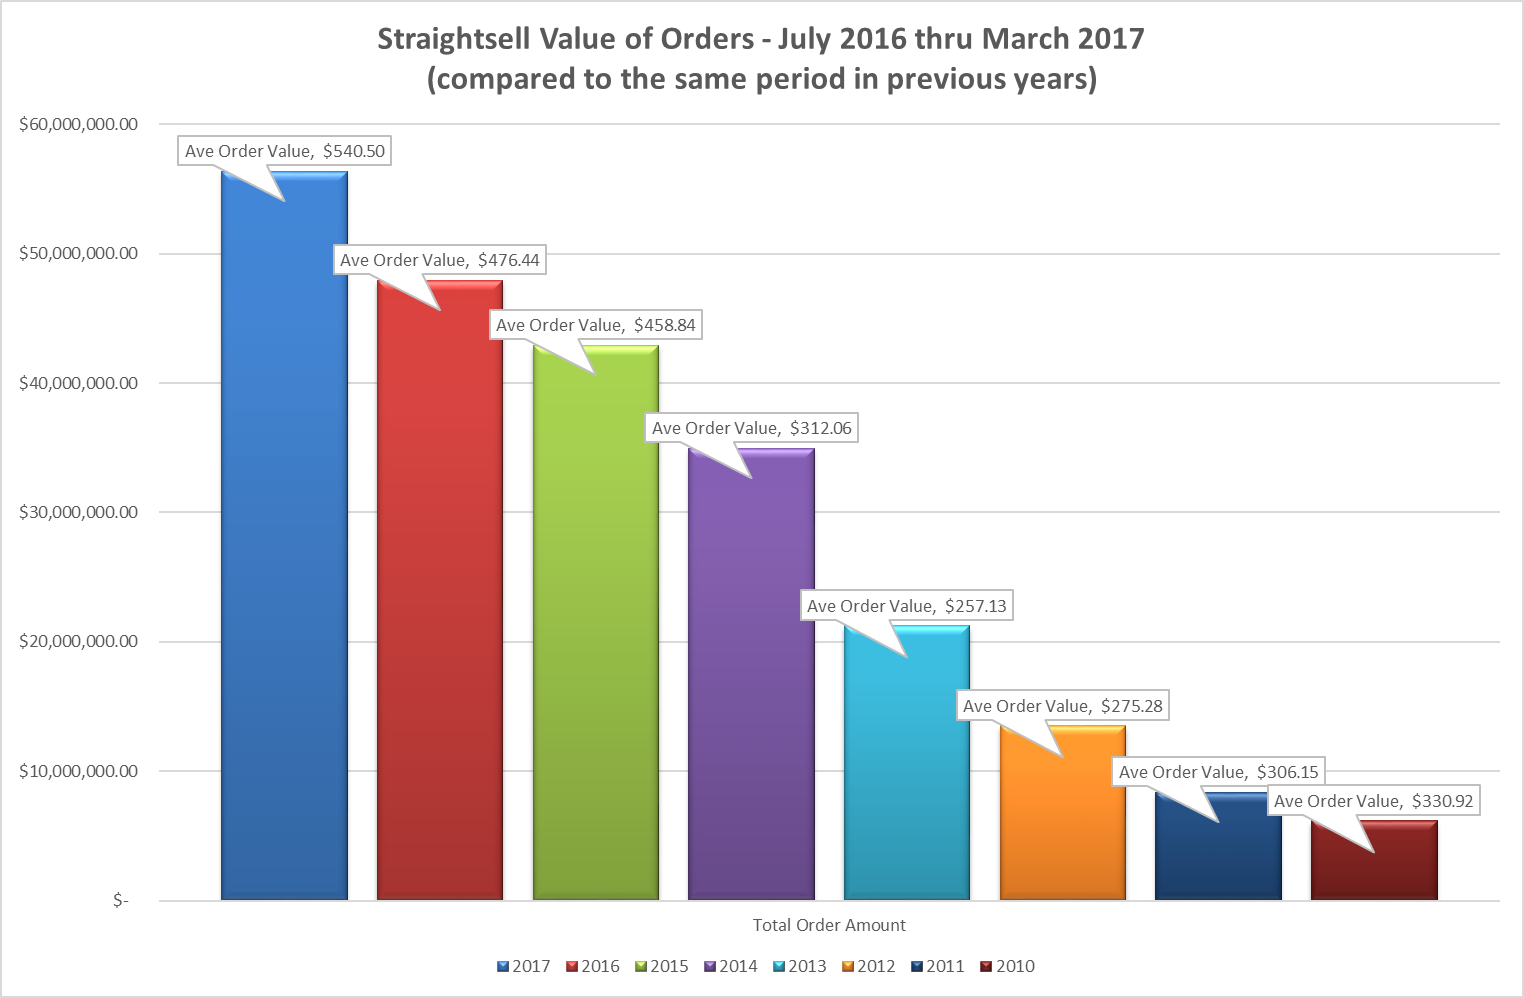 Straightsell Value of Orders - July 2016 thru March 2017